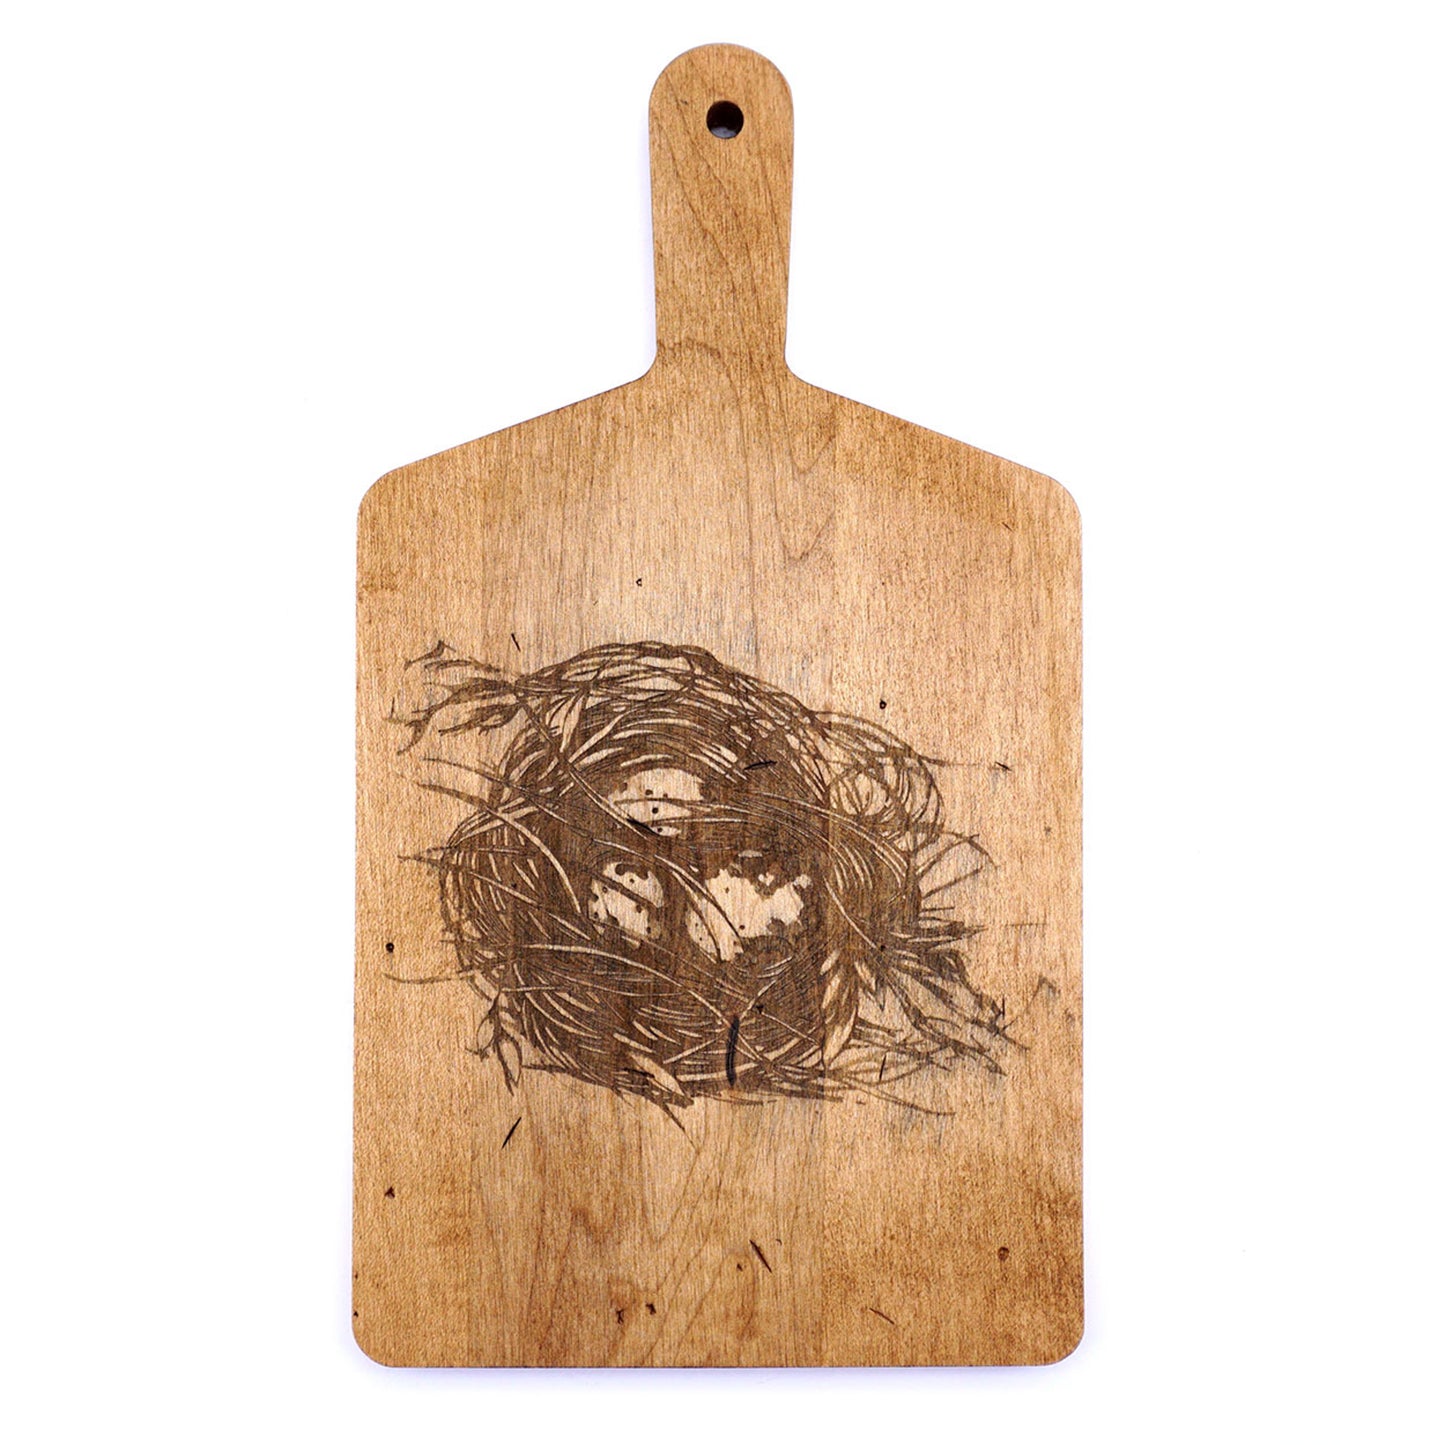 Laura Zindel Artisan Maple Rectangle Handled Serving Board - More designs available